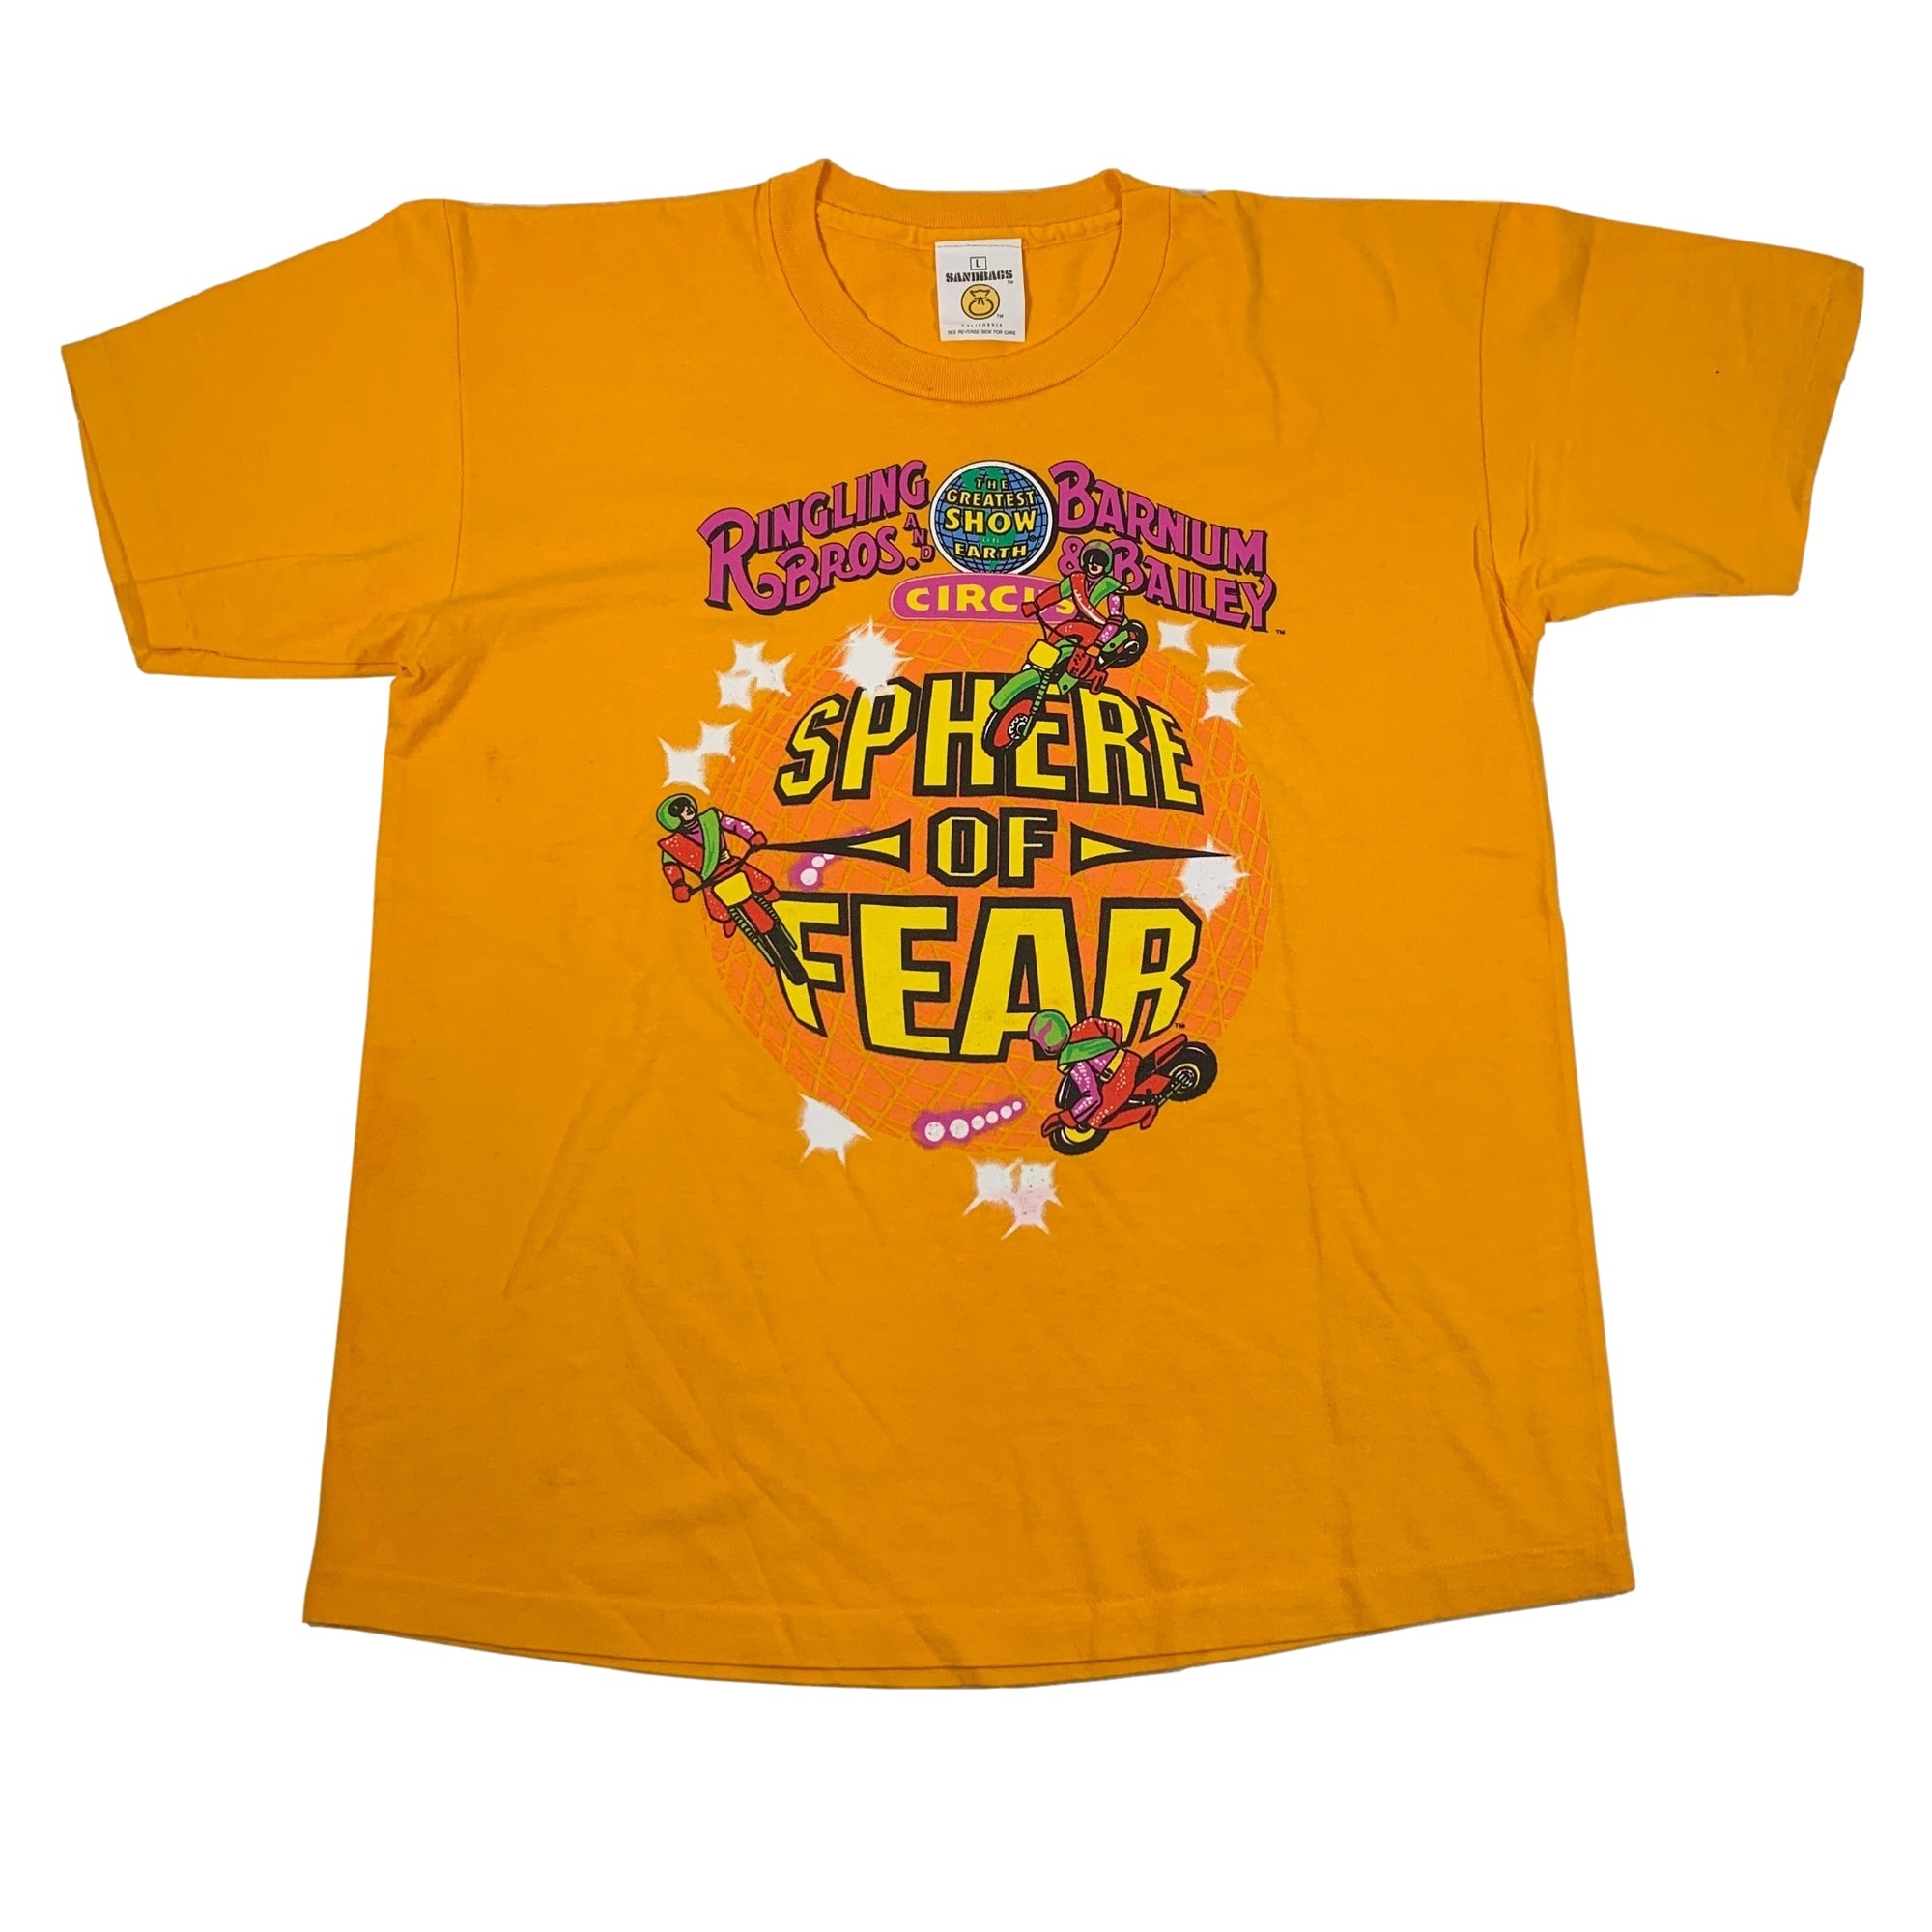 Vintage Ringling Bros And Barnum & Bailey Circus "Sphere Of Fear" T-Shirt - jointcustodydc